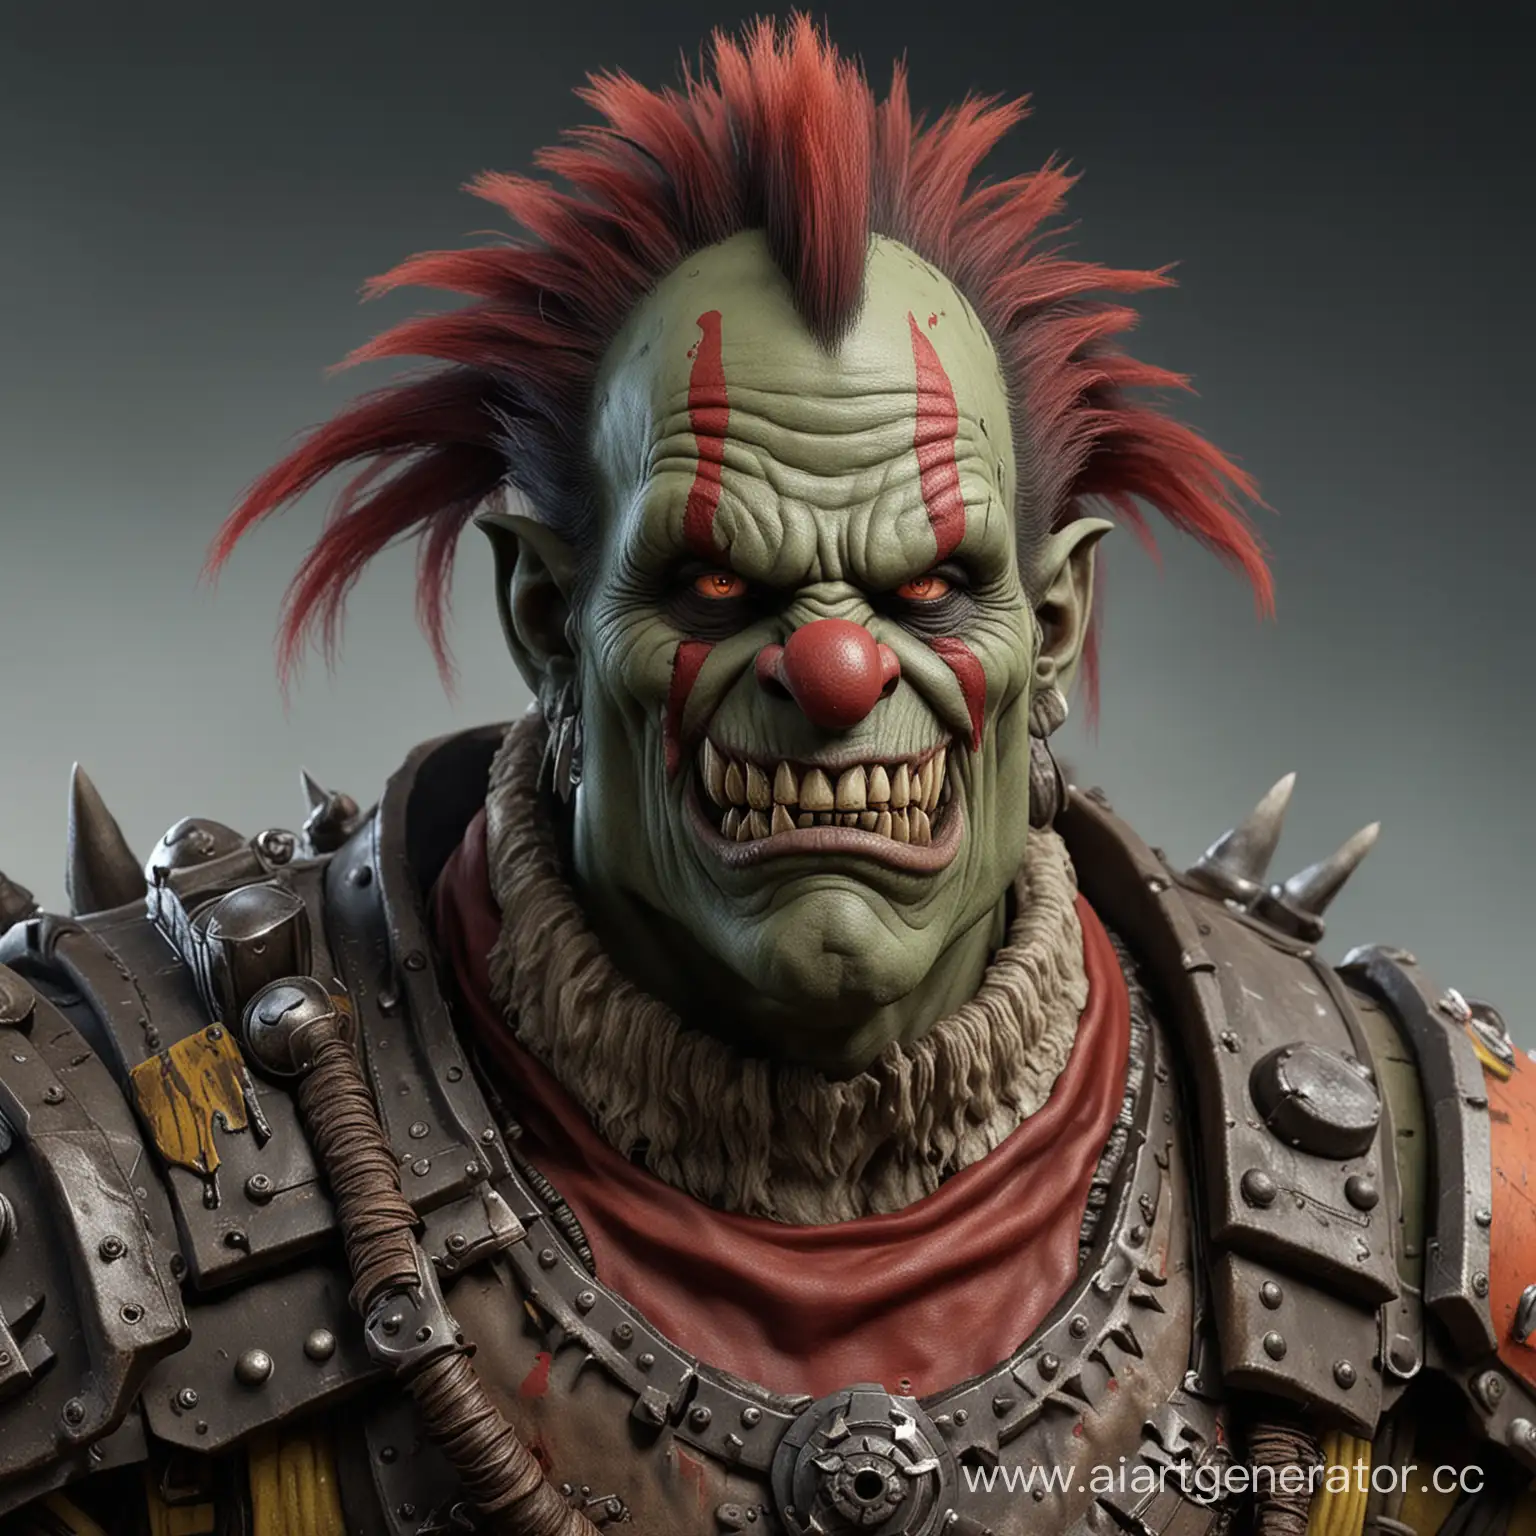 Warhammer-40k-Clown-Orc-Grinning-in-Chaotic-Mischief